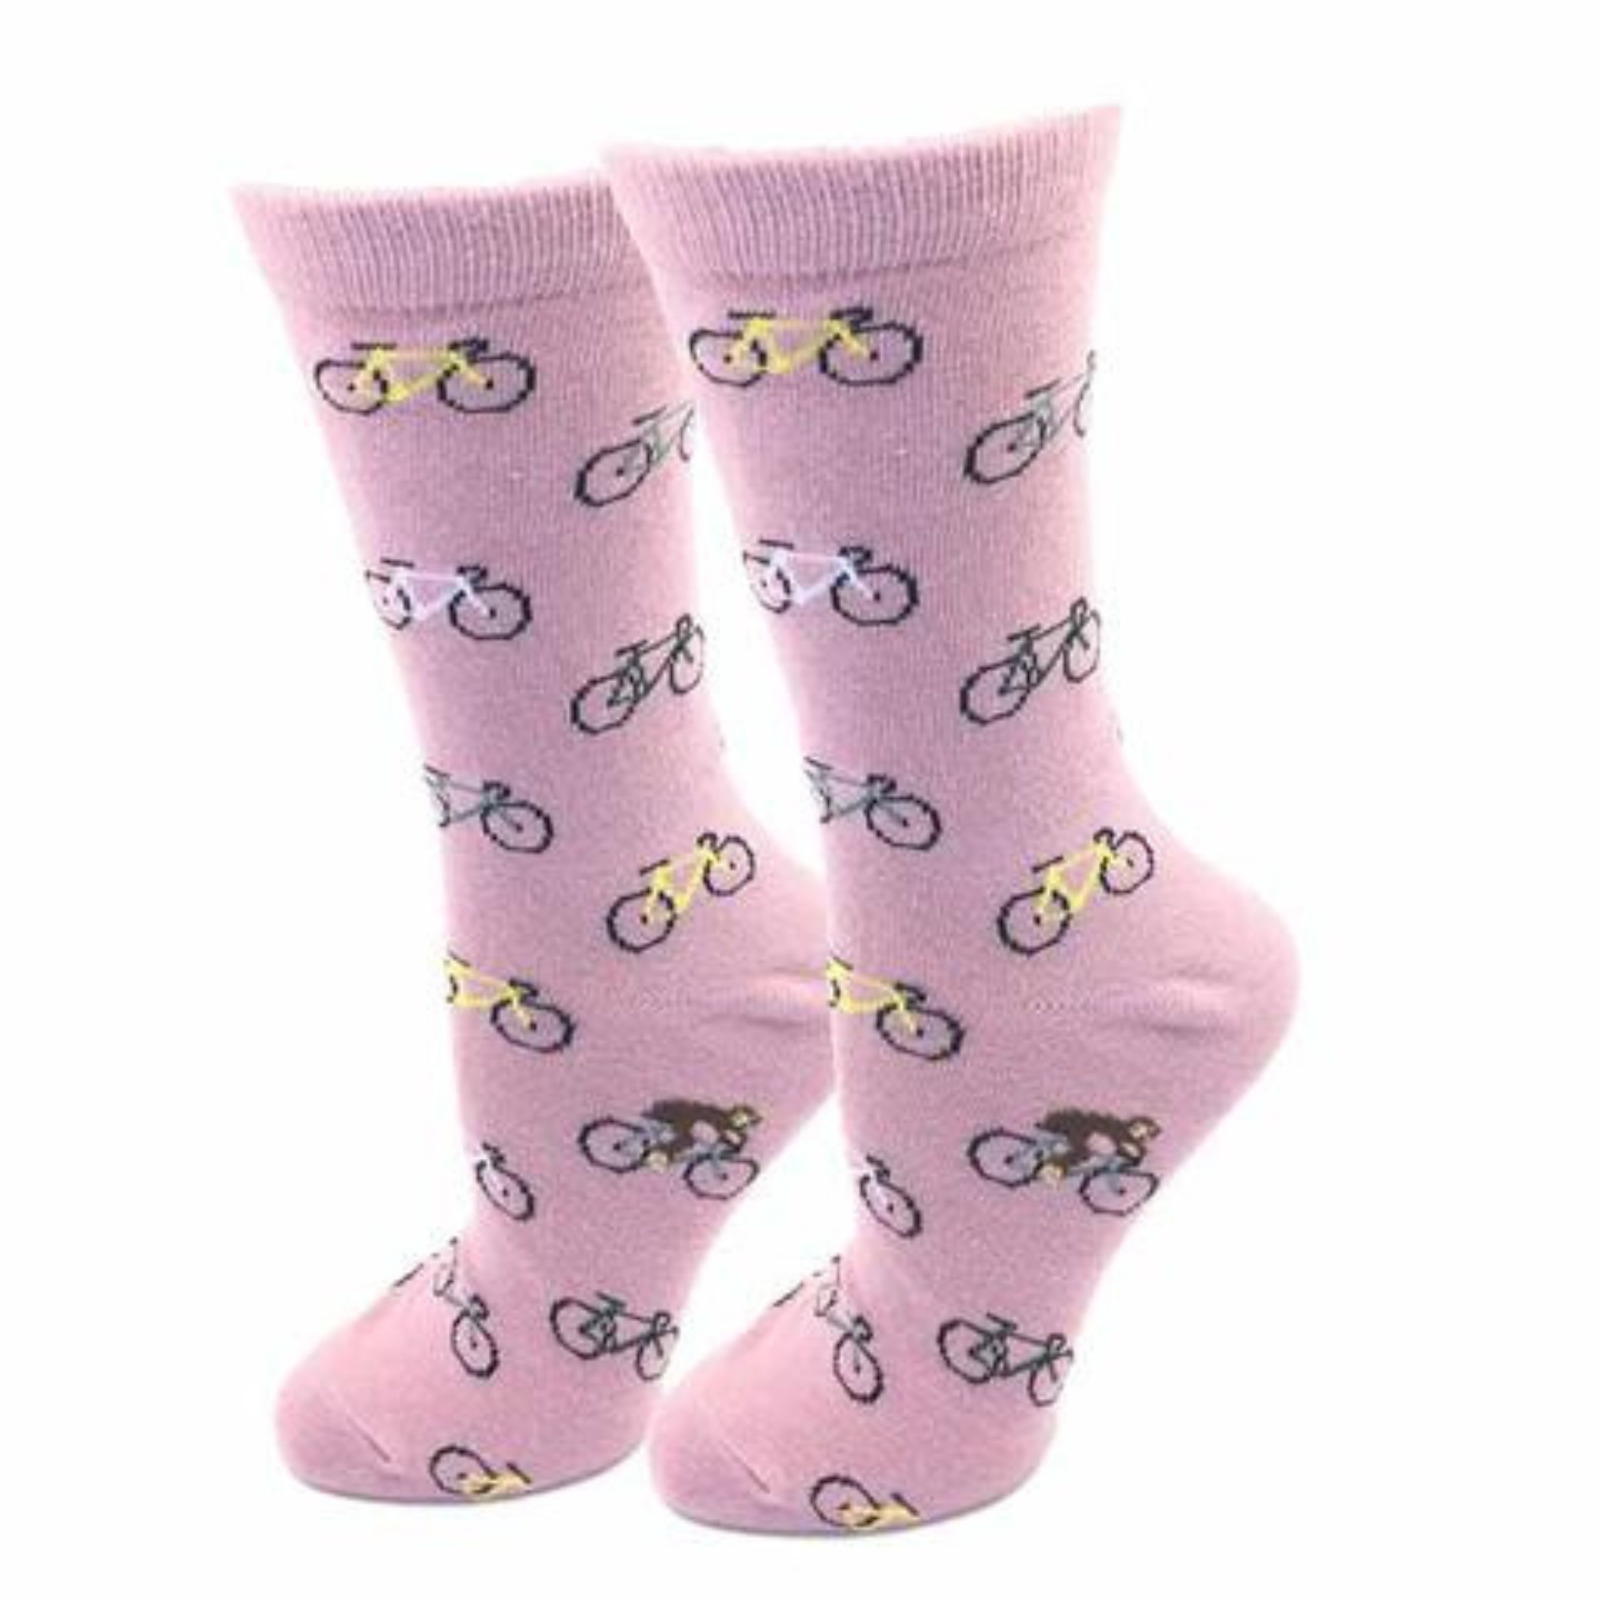 Sock Harbor Bicycle women's pink crew sock with bicycles all over